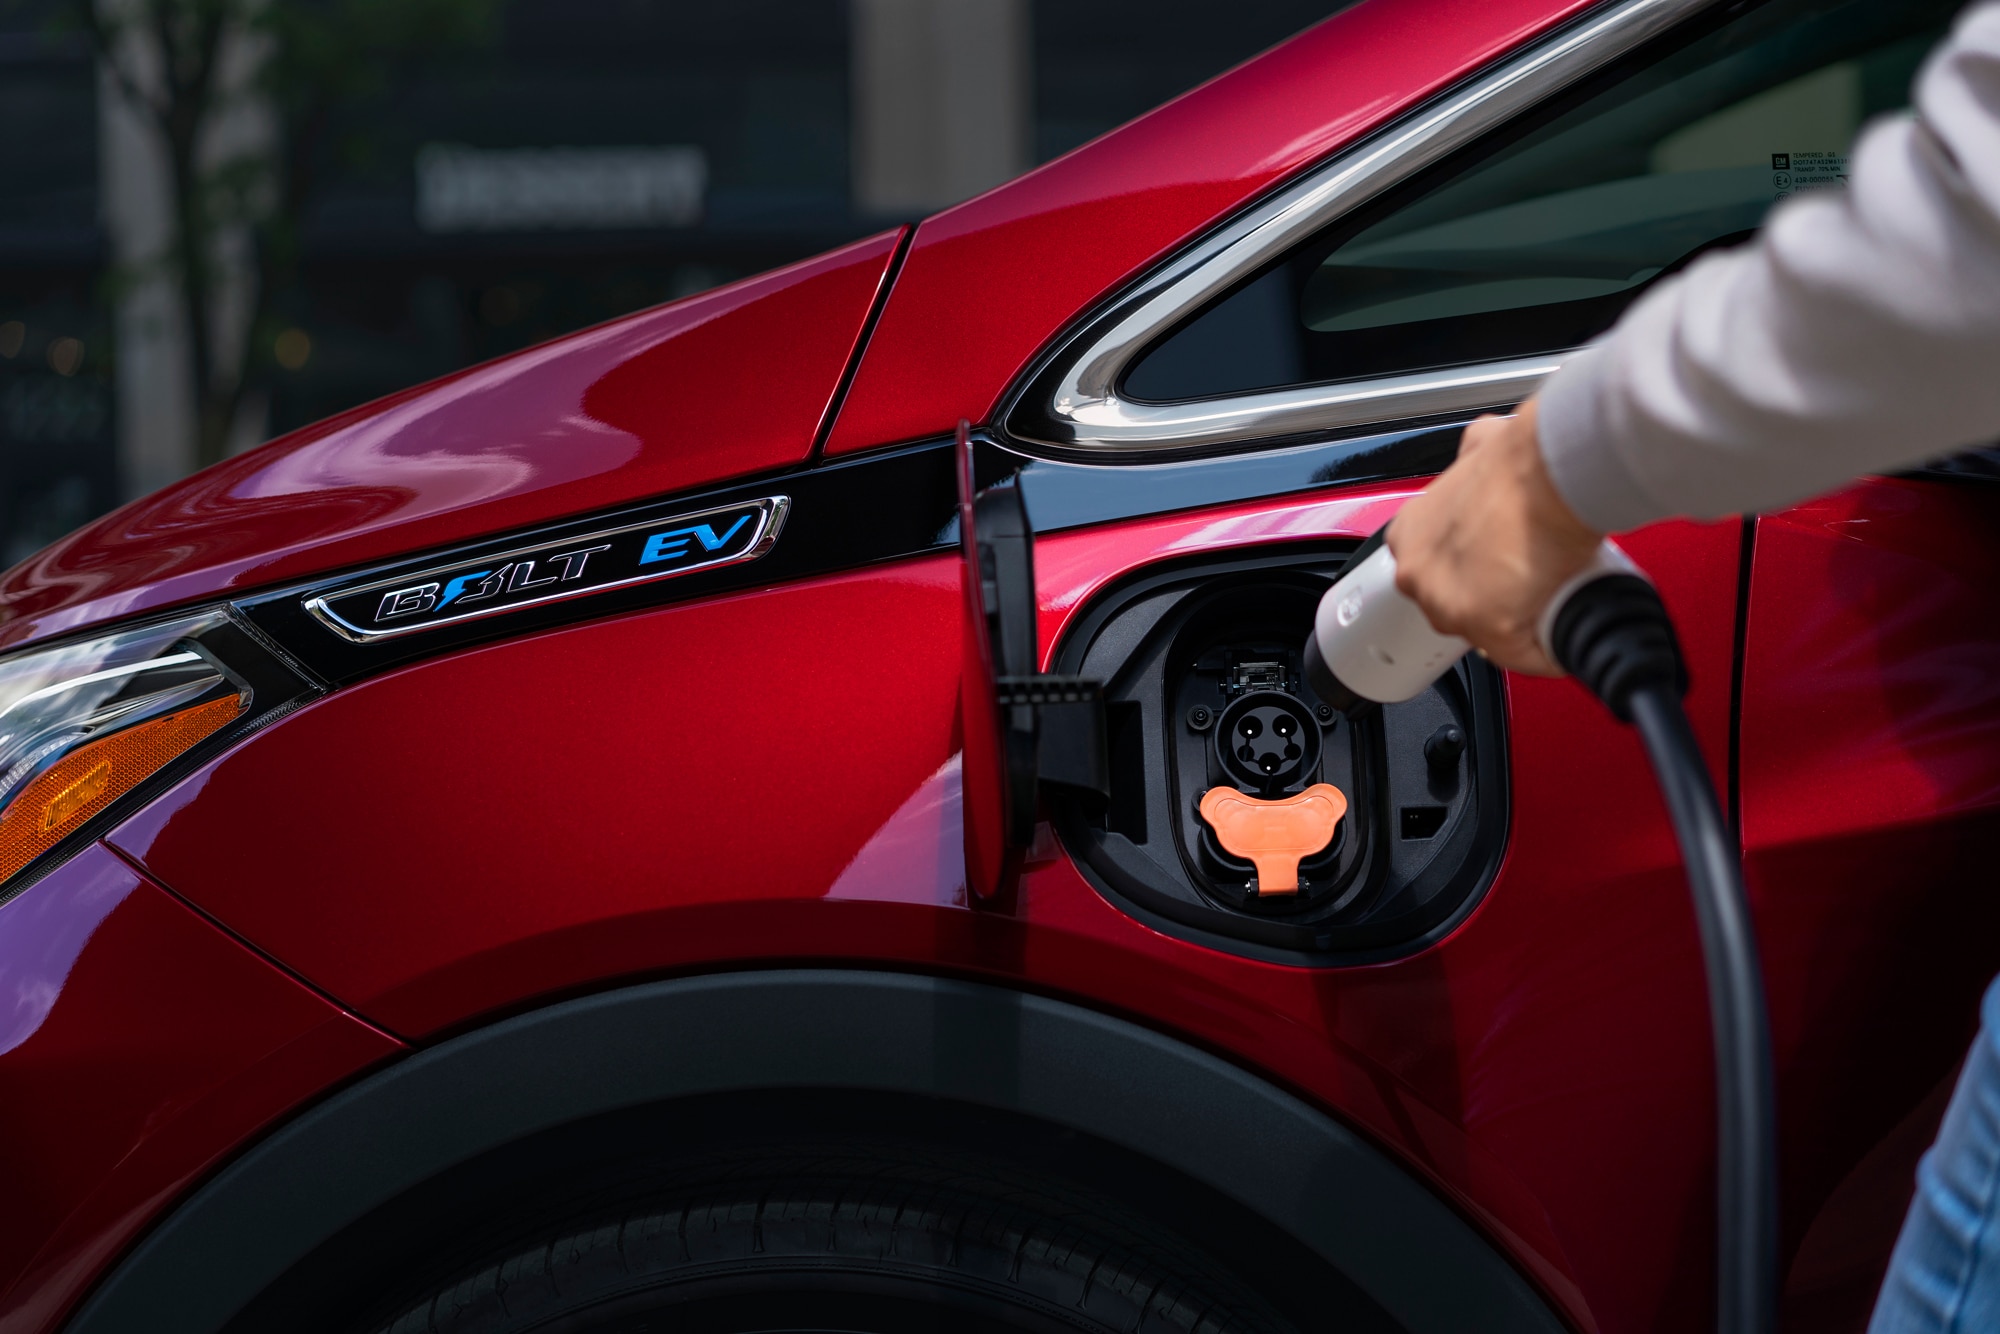 Red Chevrolet Bolt EV being plugged in to charge